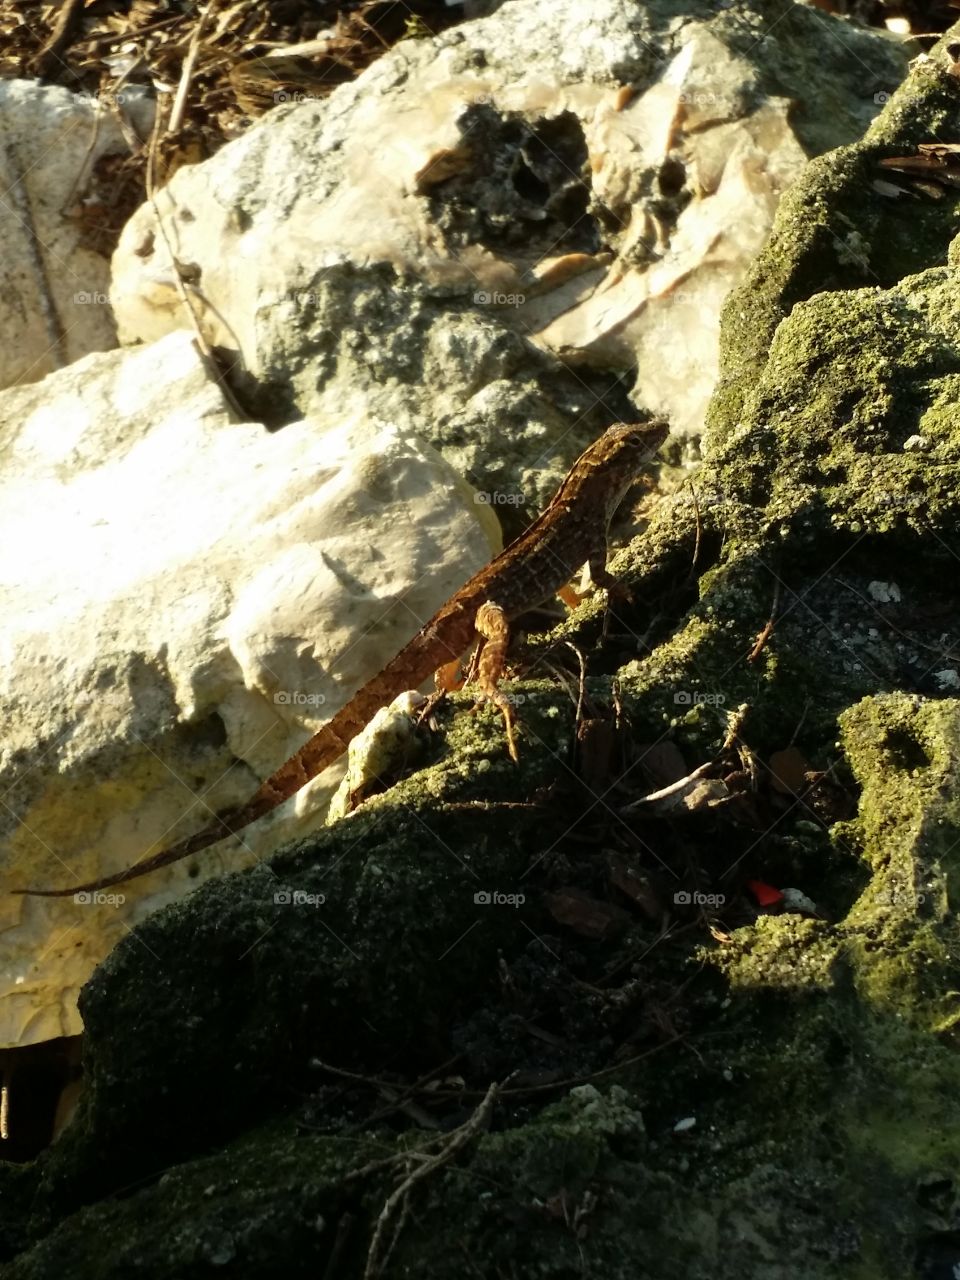 Lizard On The Rocks. Took this at Cranes Roost in Altamonte Springs Florida. 